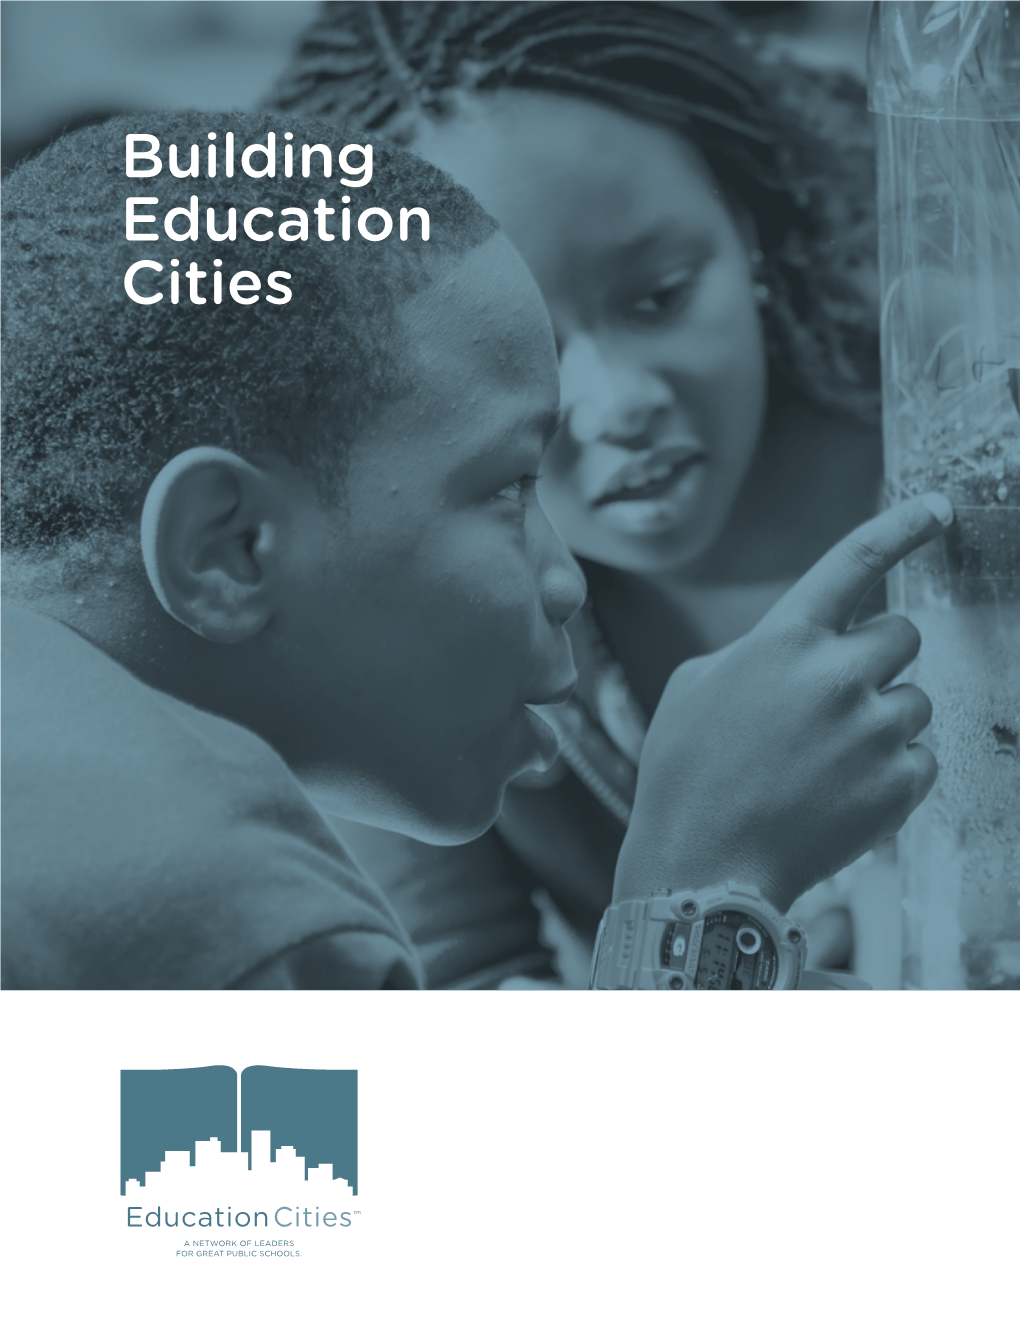 Building Education Cities